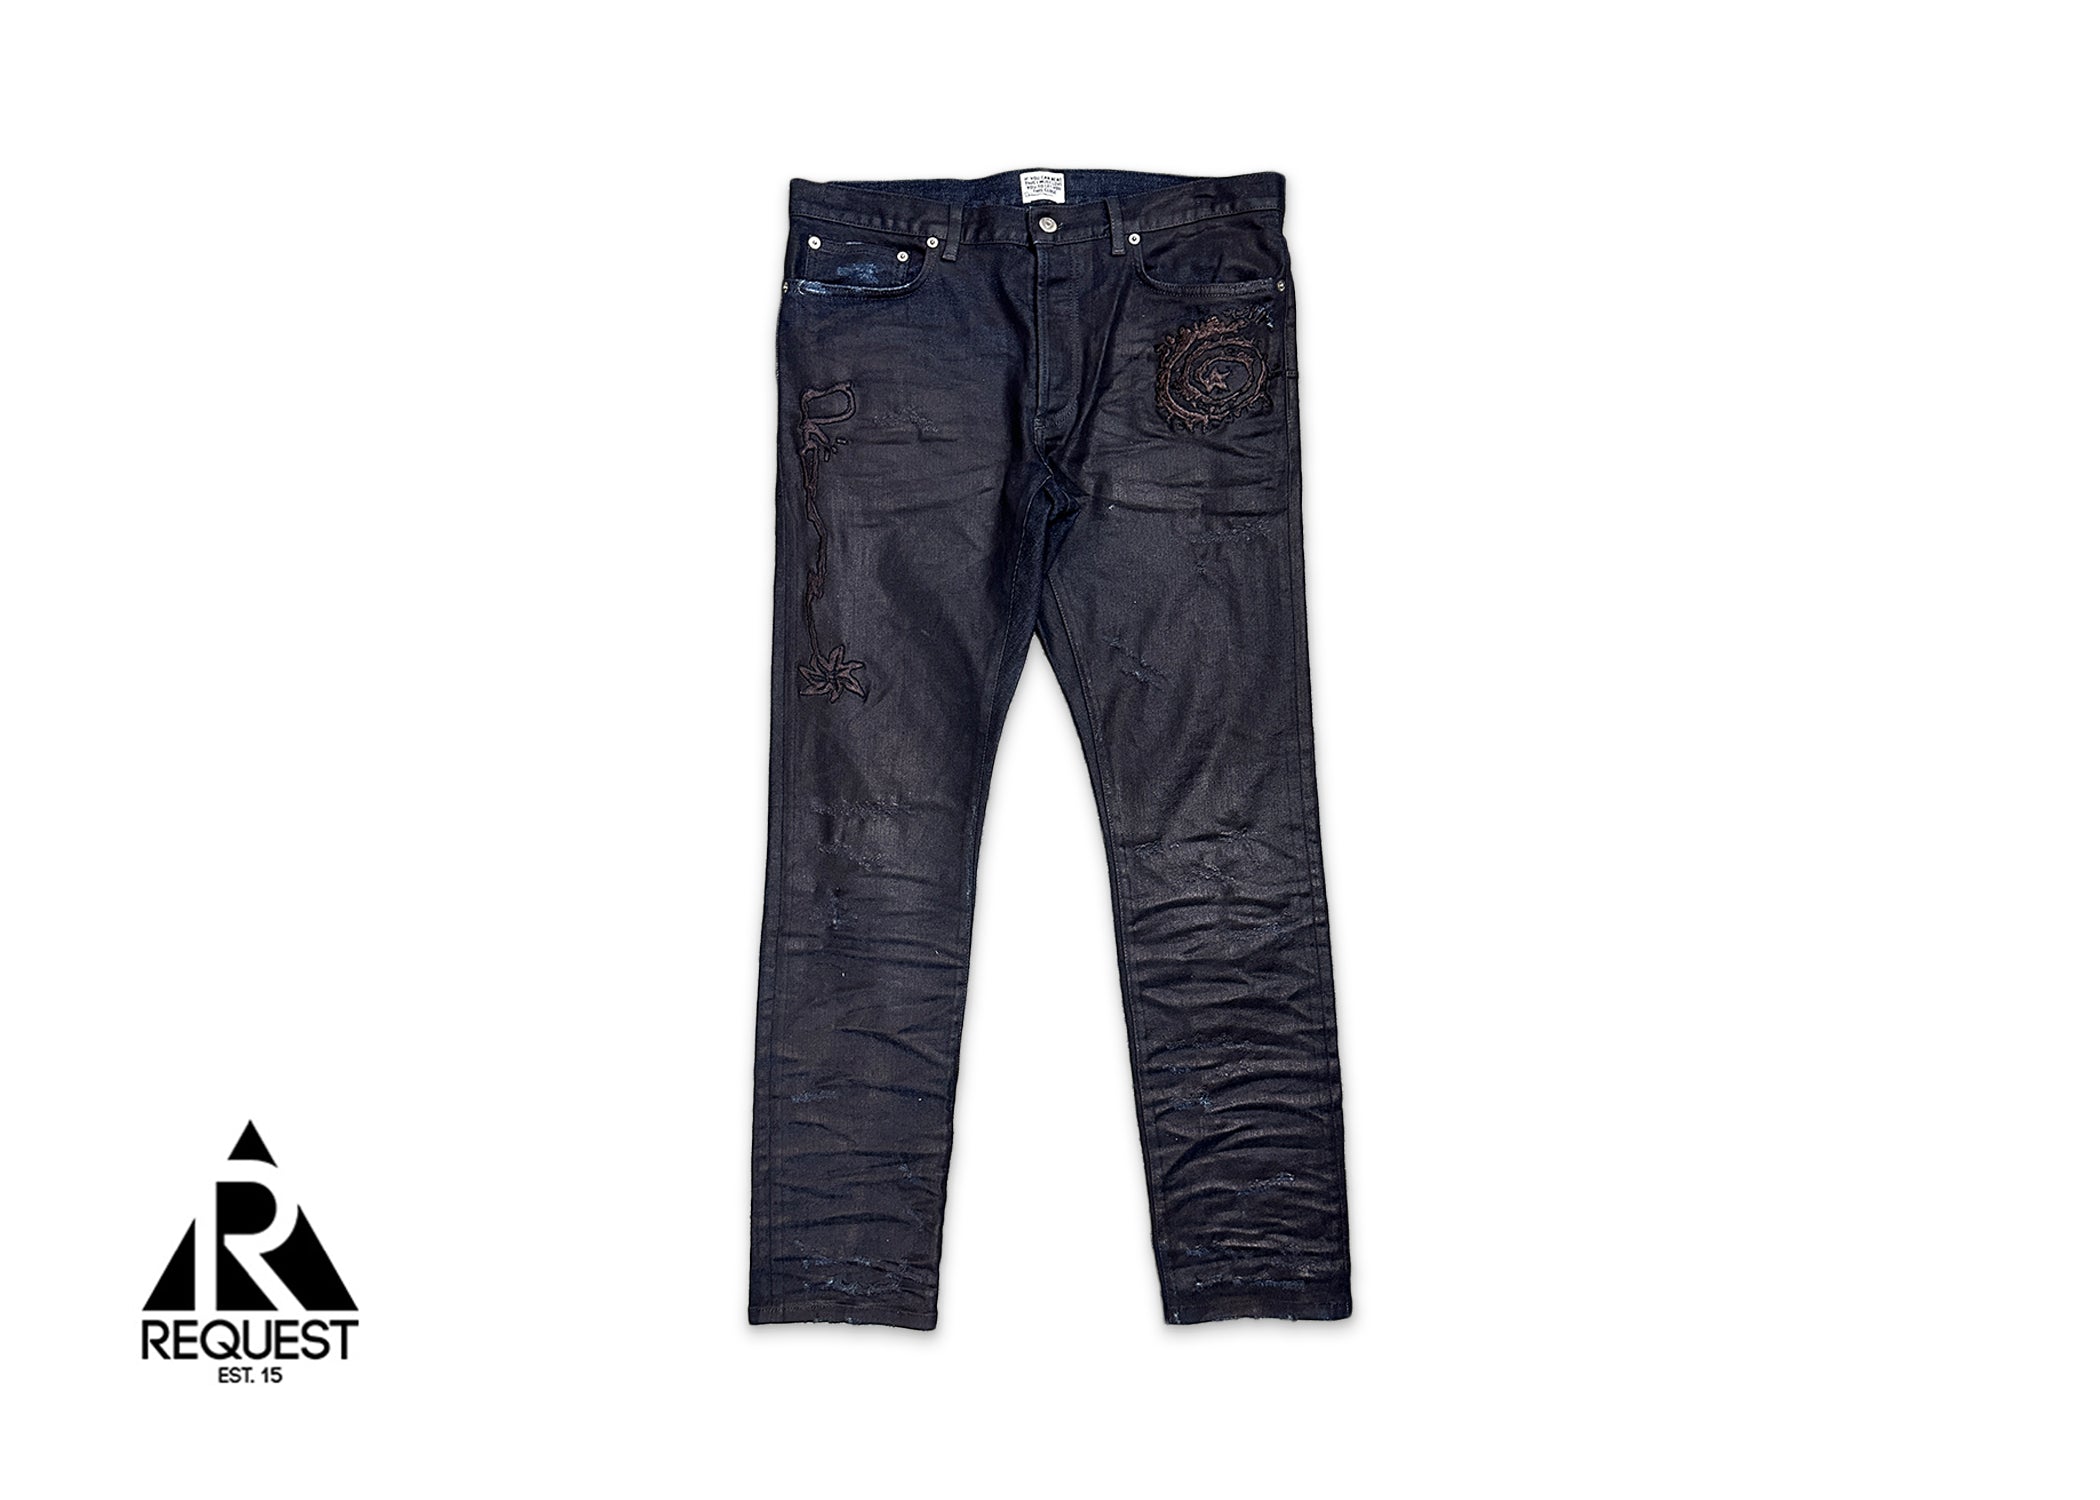 Dior x Cactus Jack Slim-Fit Waxed Jeans "Blue"